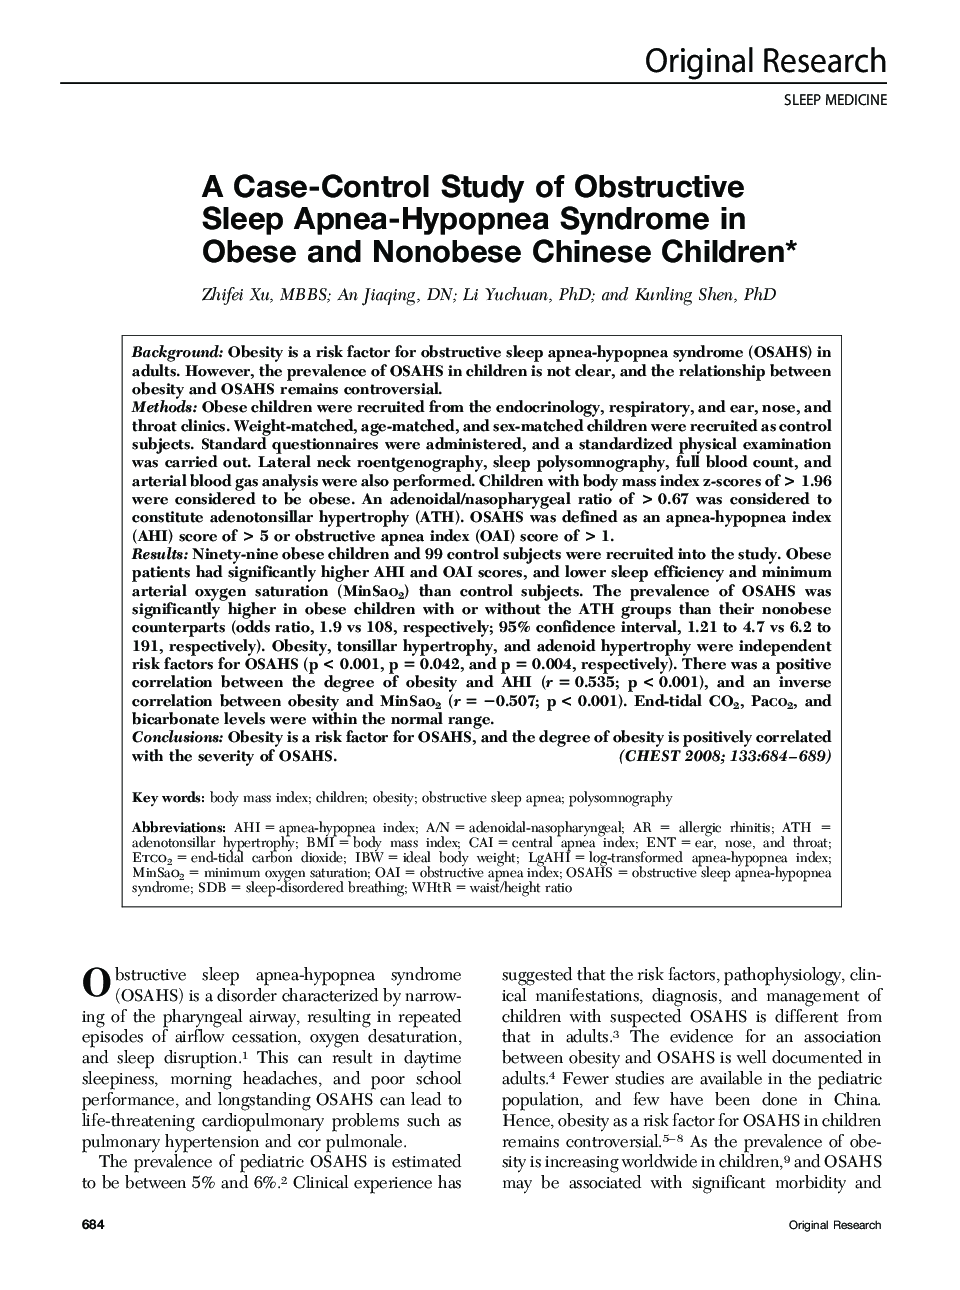 A Case-Control Study of Obstructive Sleep Apnea-Hypopnea Syndrome in Obese and Nonobese Chinese Children 